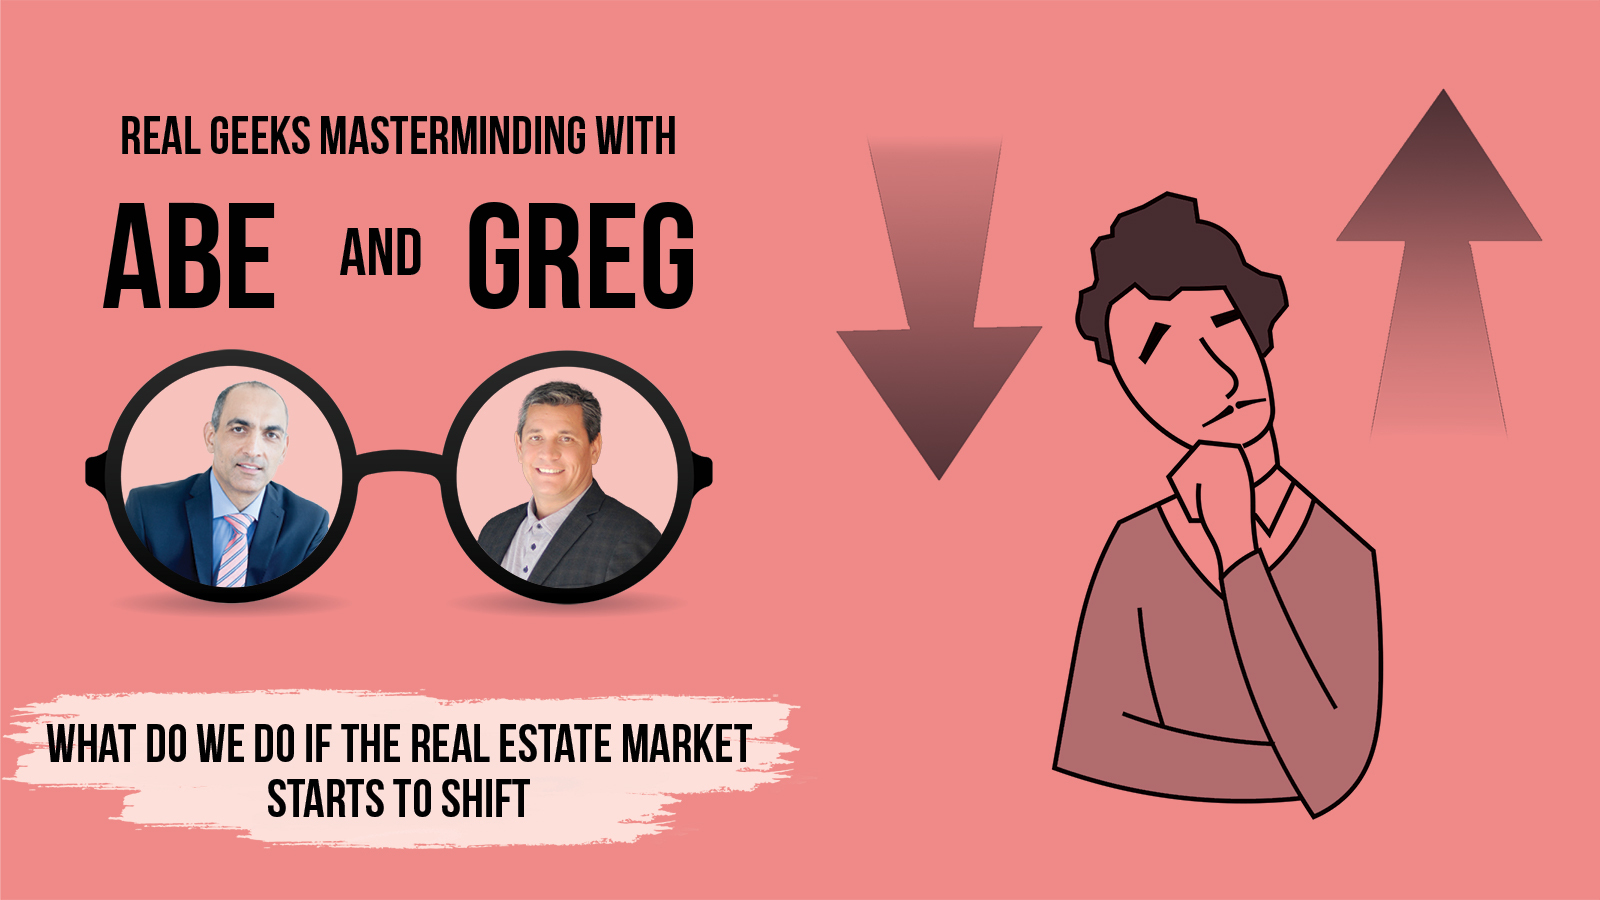 What Do We Do If The Real Estate Market Starts To Shift?